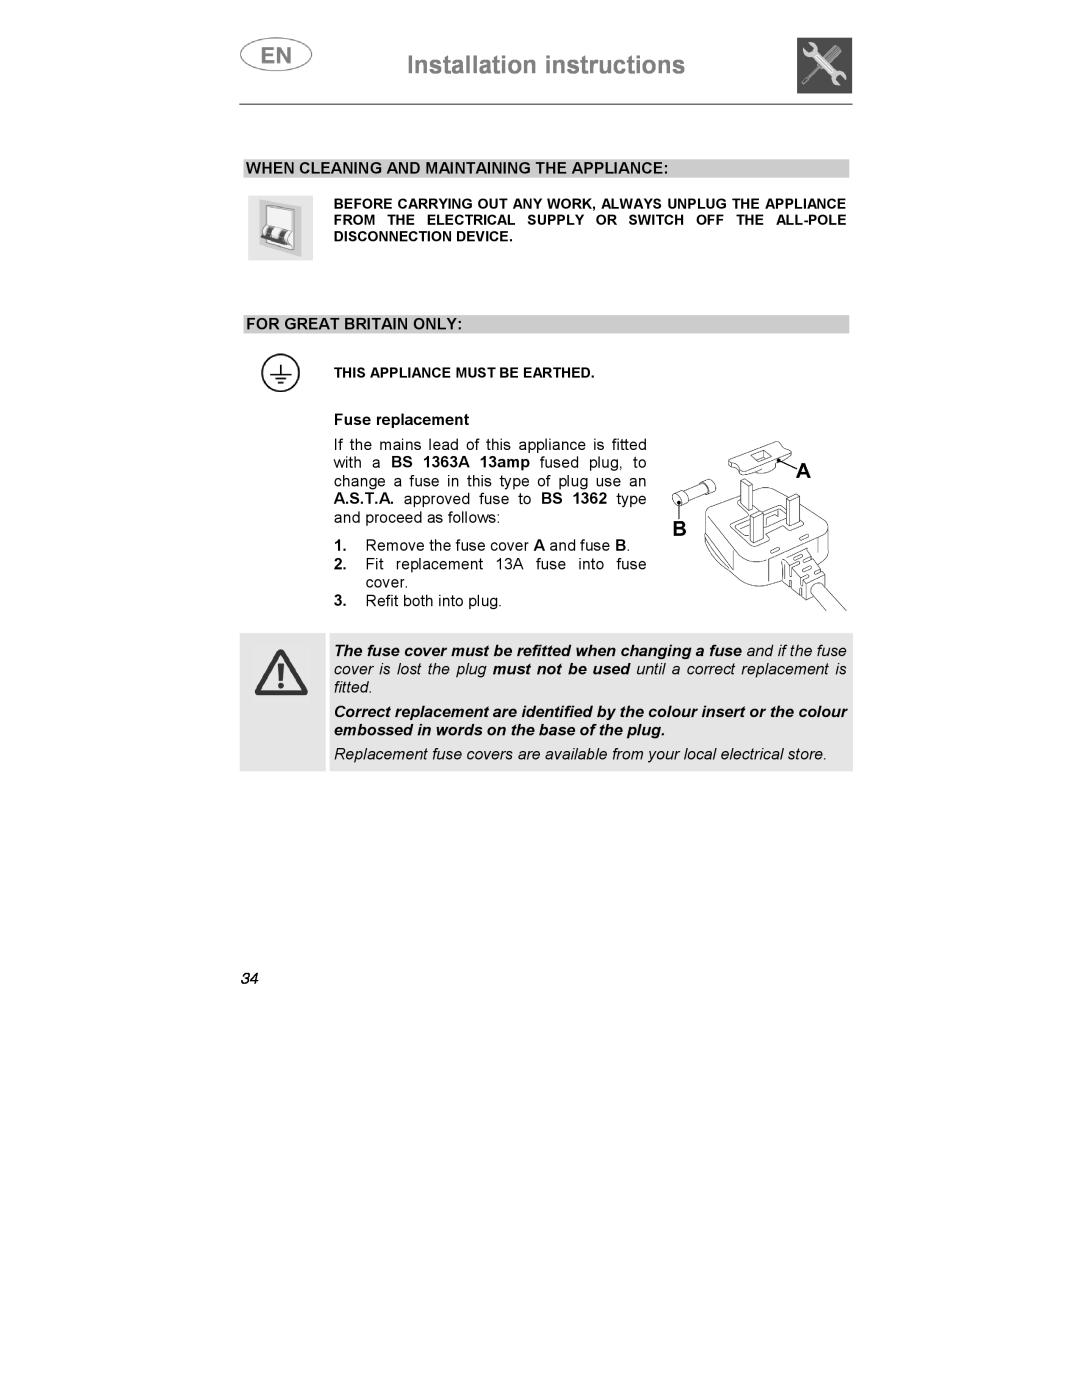 Smeg KS60-2, KS60-3T Installation instructions, When Cleaning And Maintaining The Appliance, For Great Britain Only 